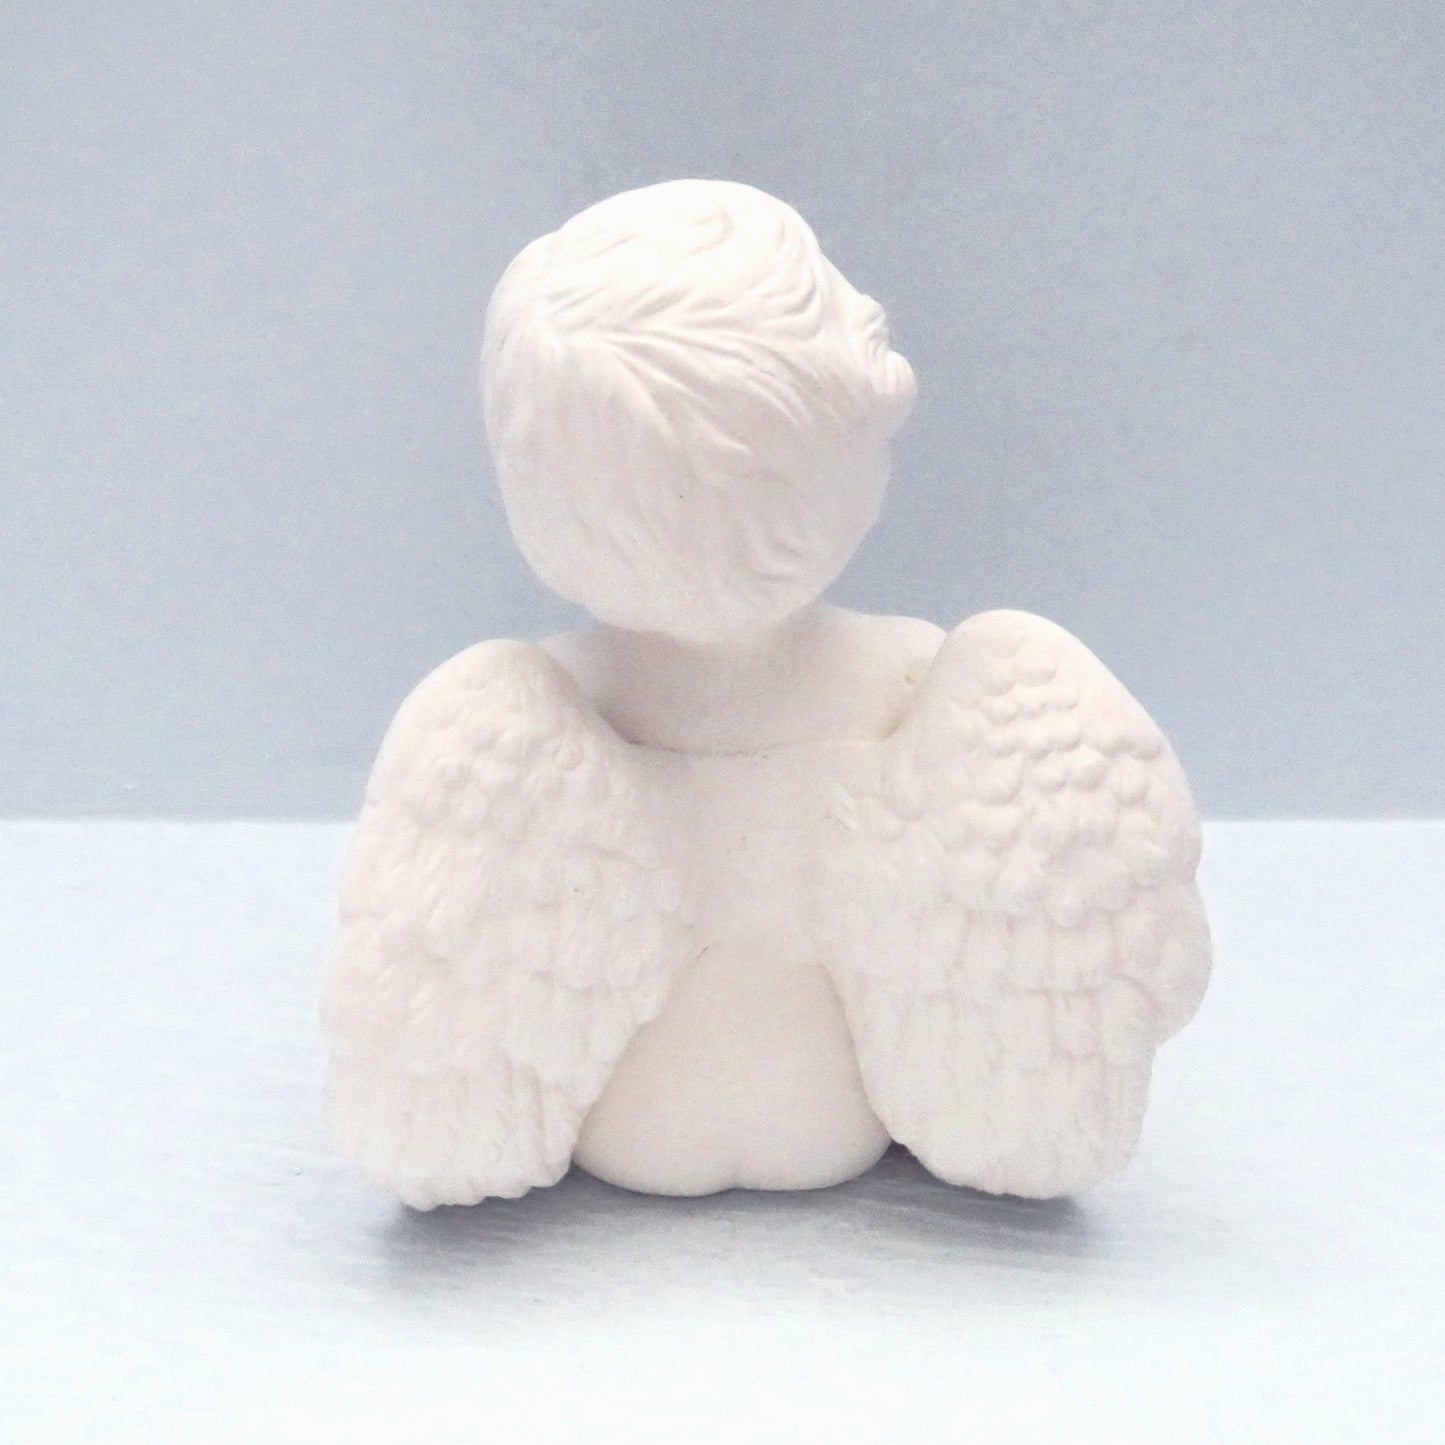 Back veiw of unpainted ceramic cherub angel showing the wings and their detail.  The detail in the hair is good.